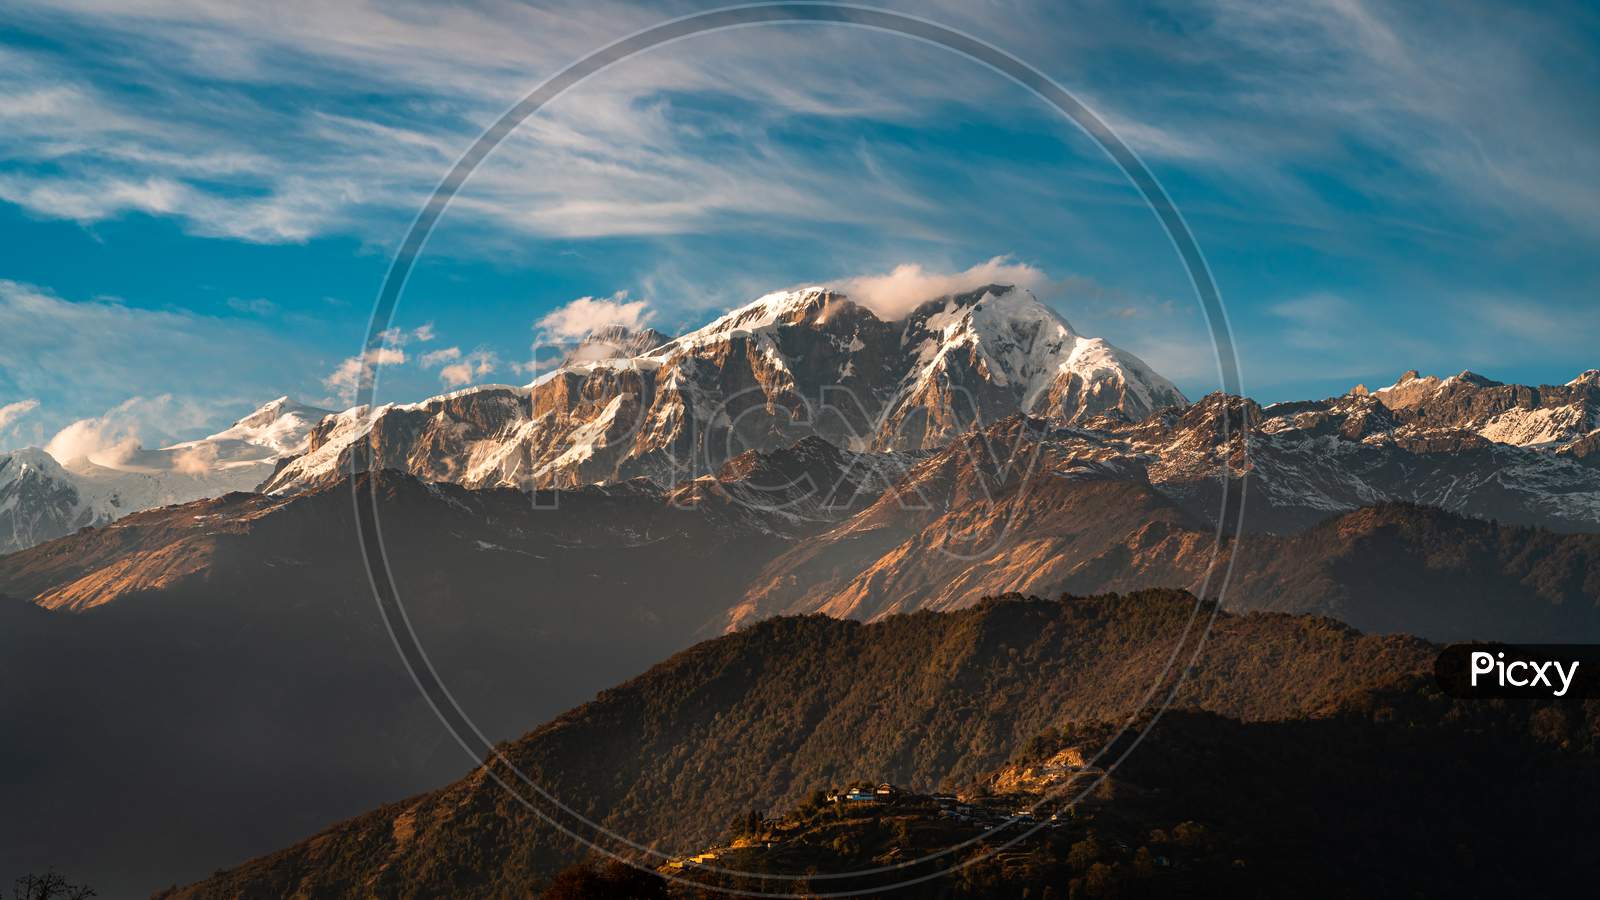 Peaks of mountain in Himalayas and a village below